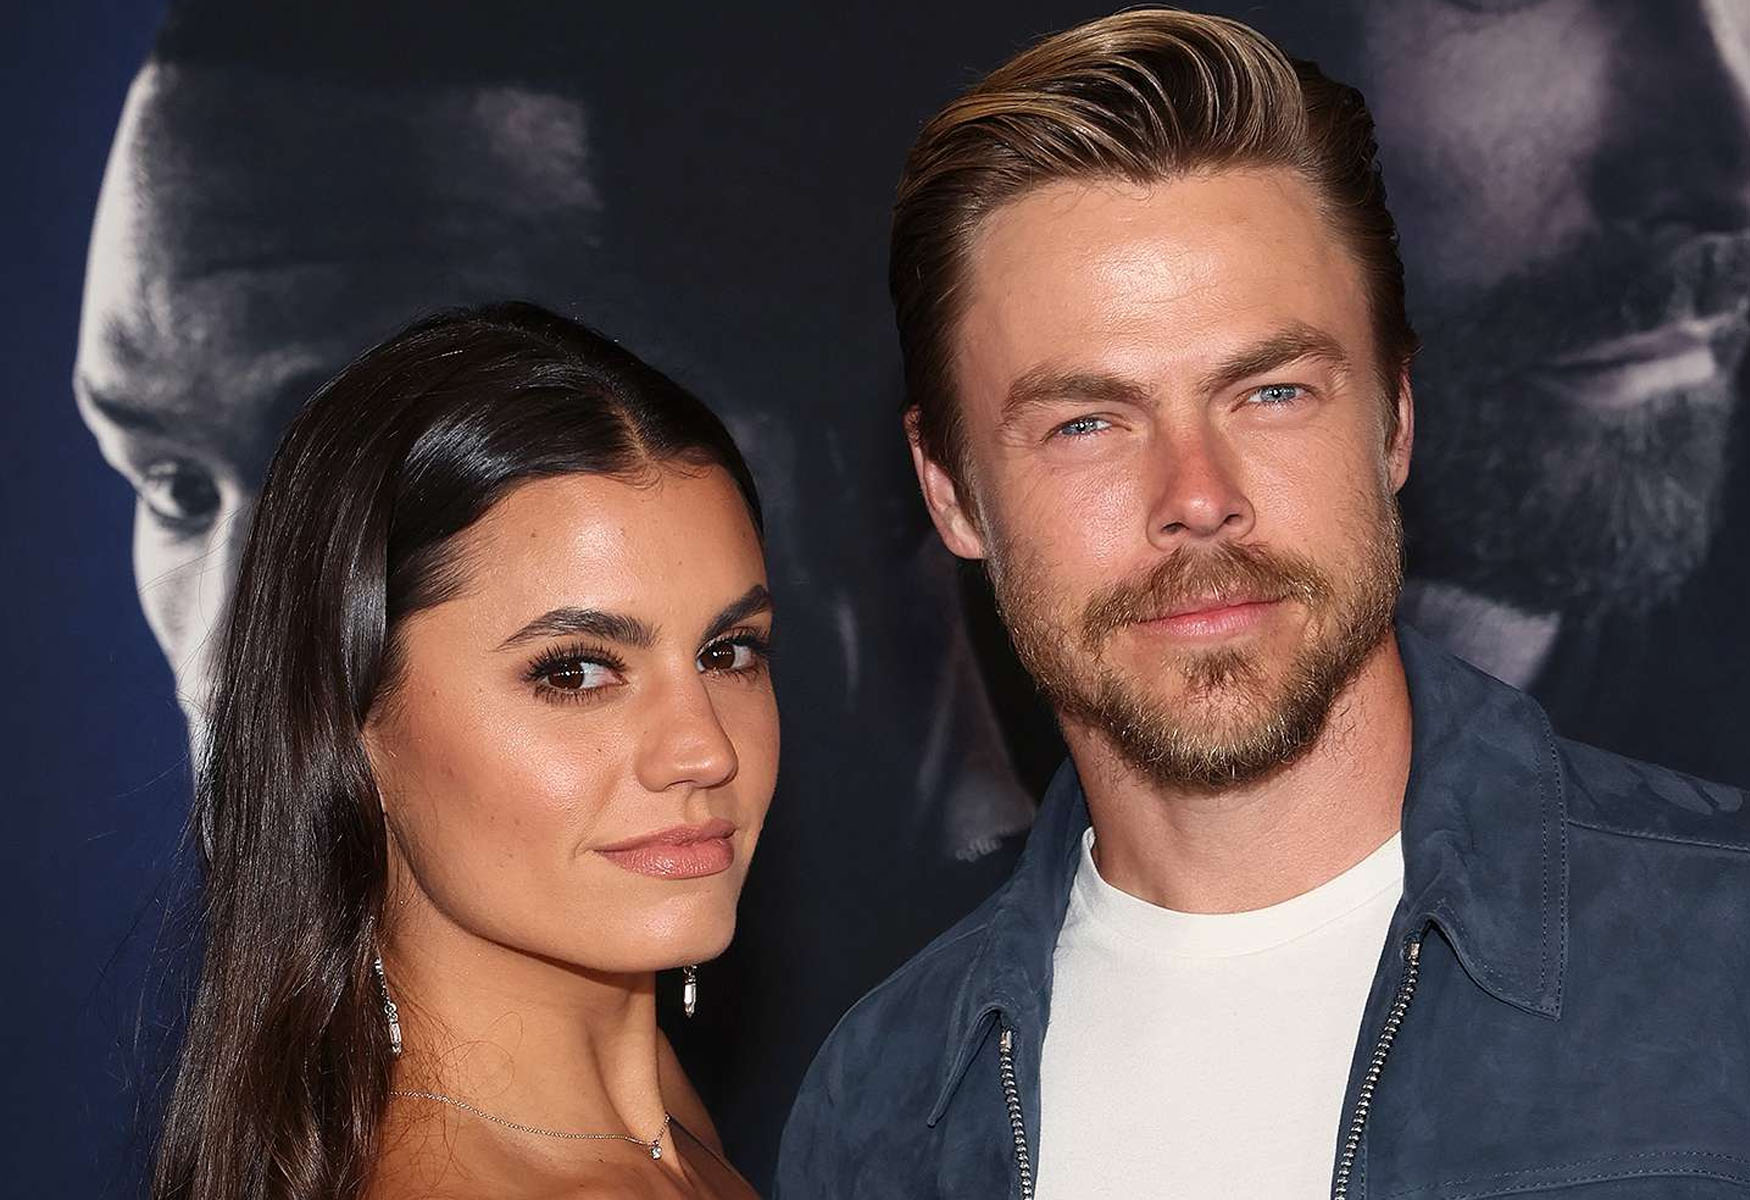 Derek Hough’s Wife Faces Challenging Road To Recovery After Brain Surgery, Says The “Dancing With The Stars” Judge